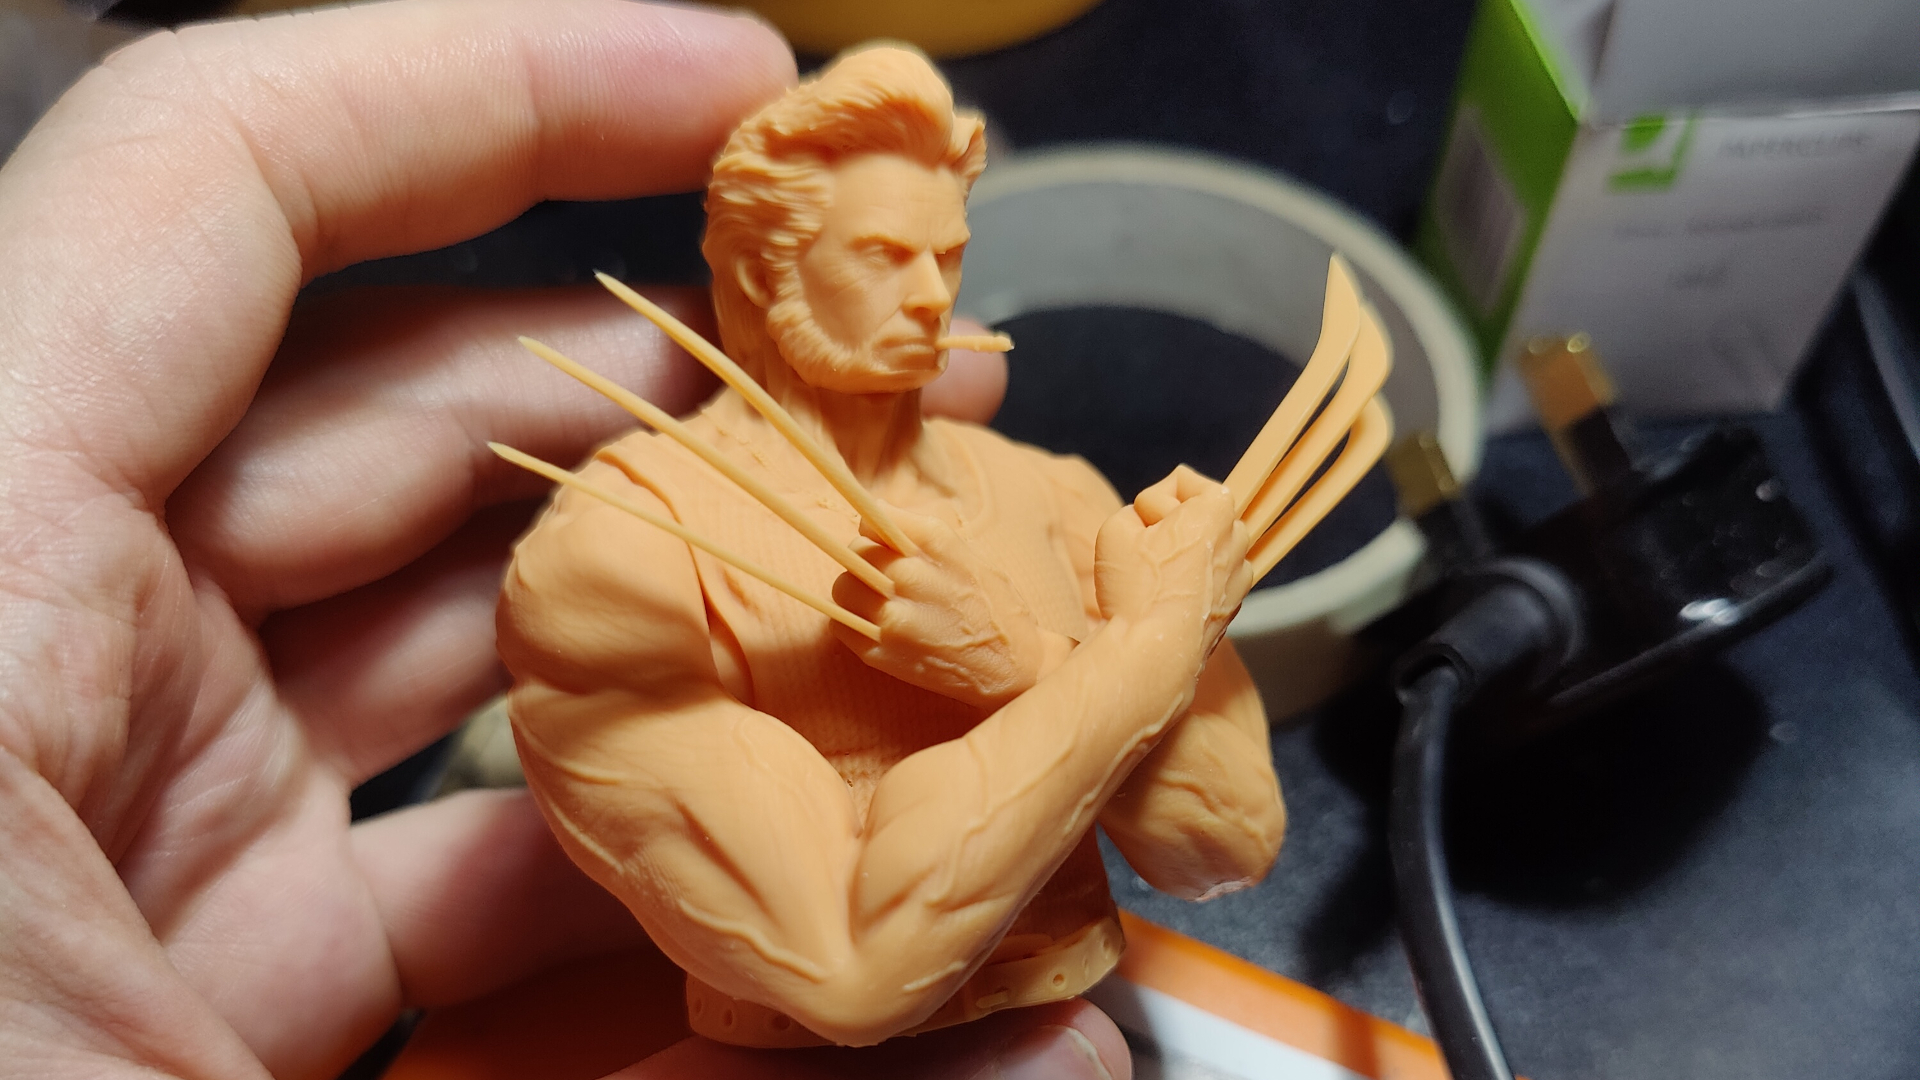 Imprimante 3D AnyCubic Photon Ultra